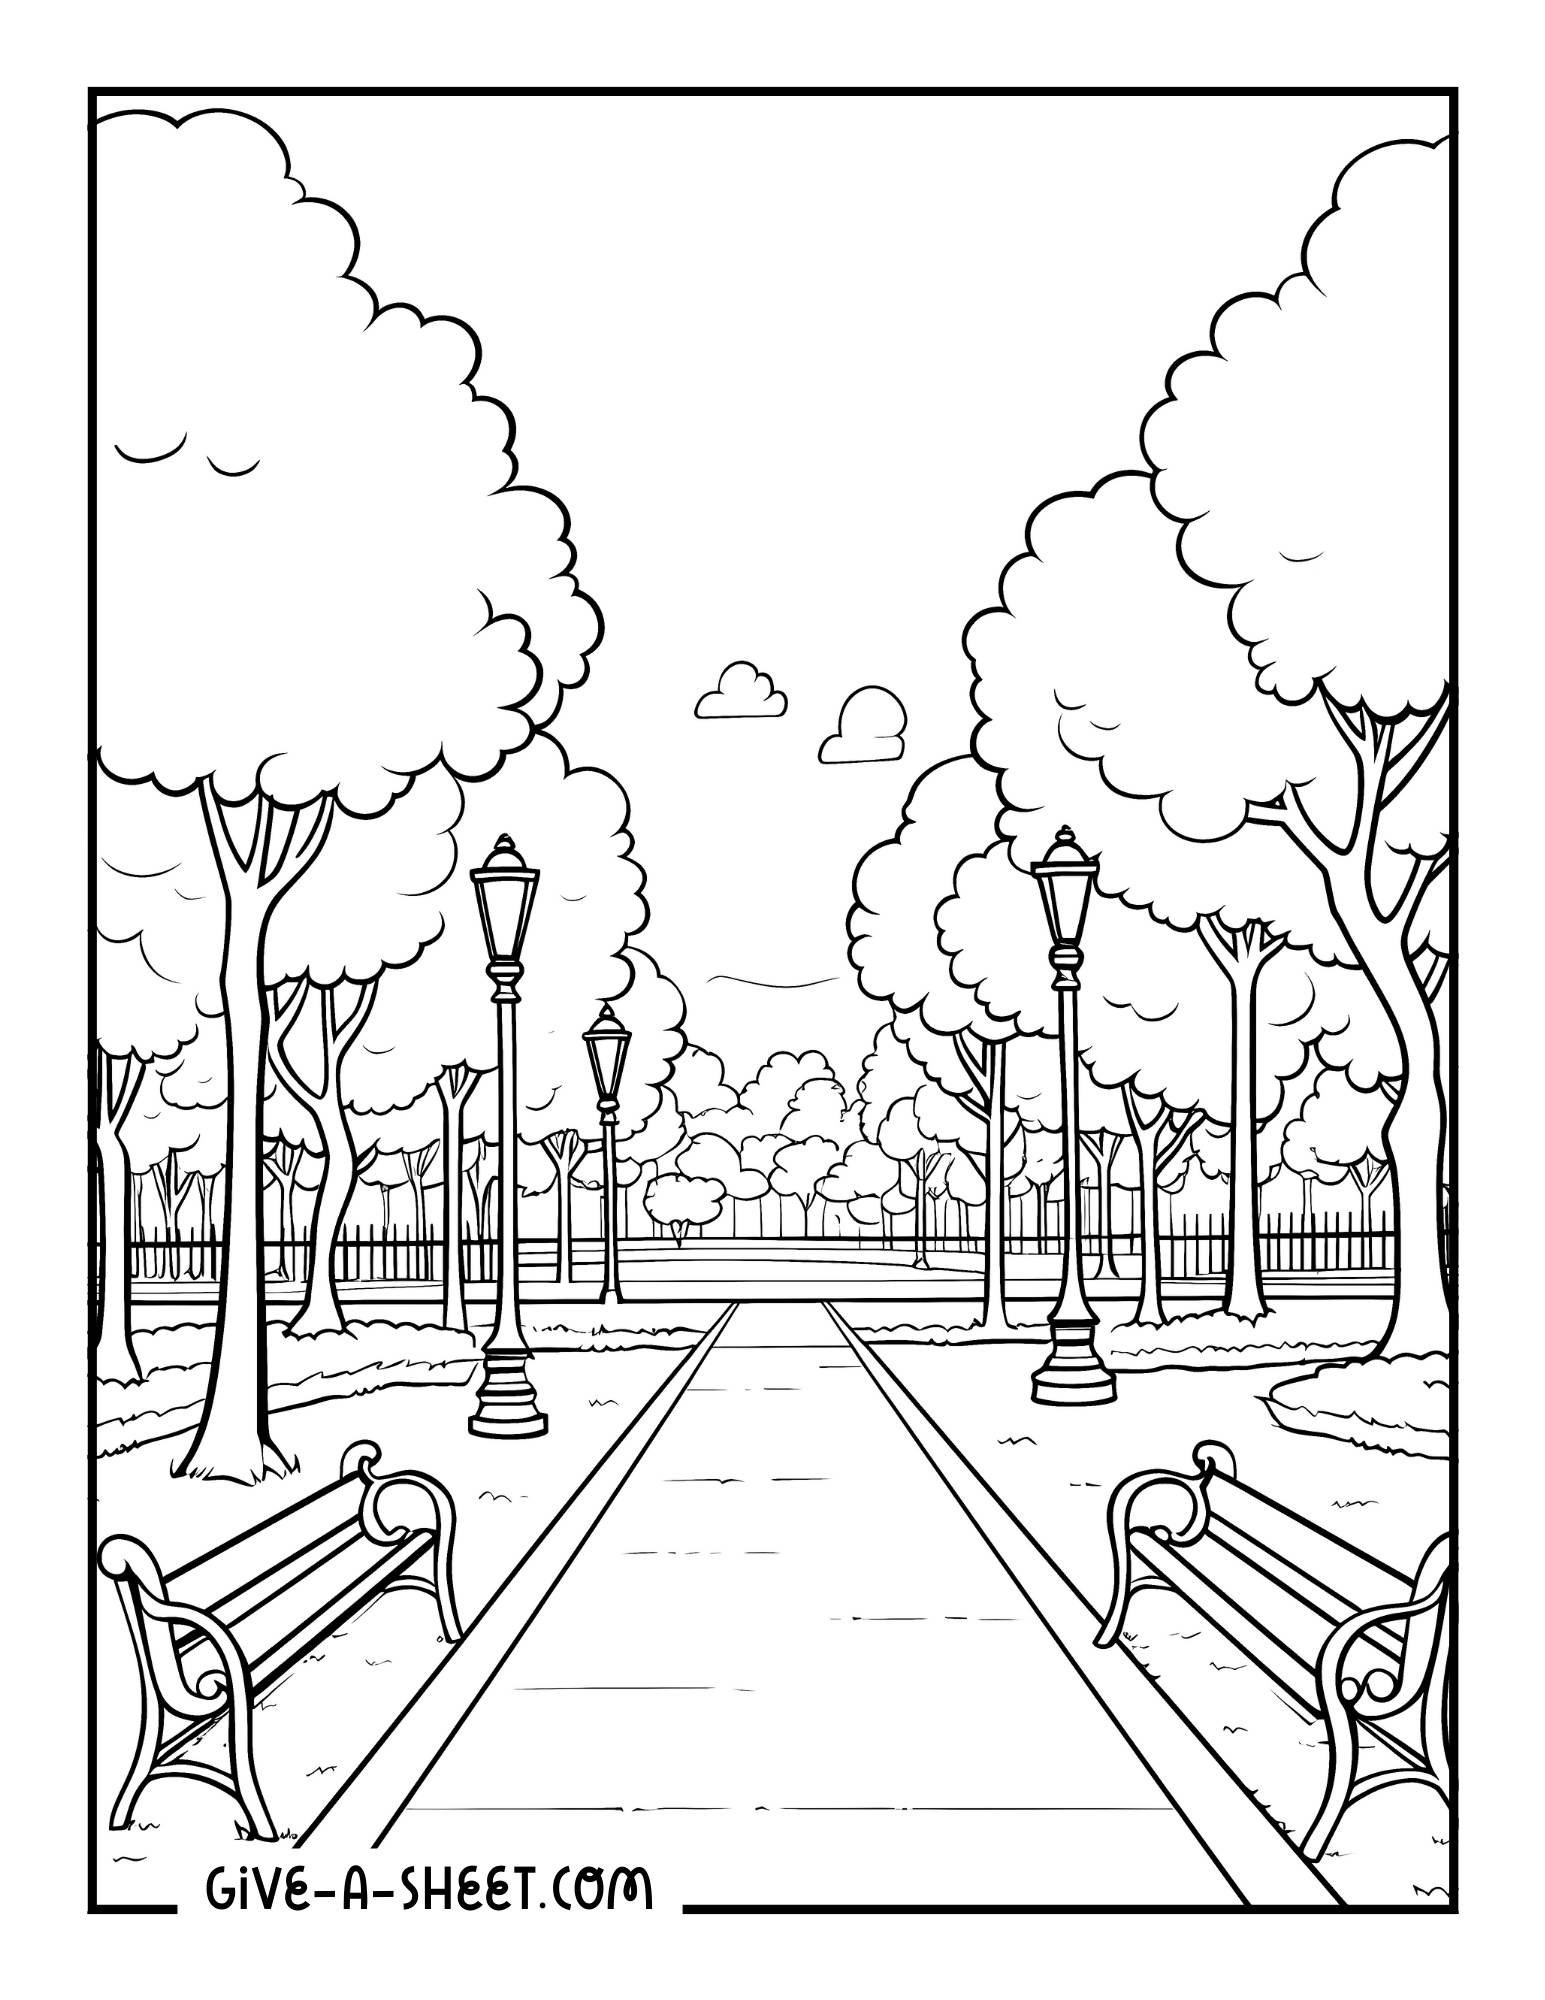 Beauty of trees in the park coloring page.